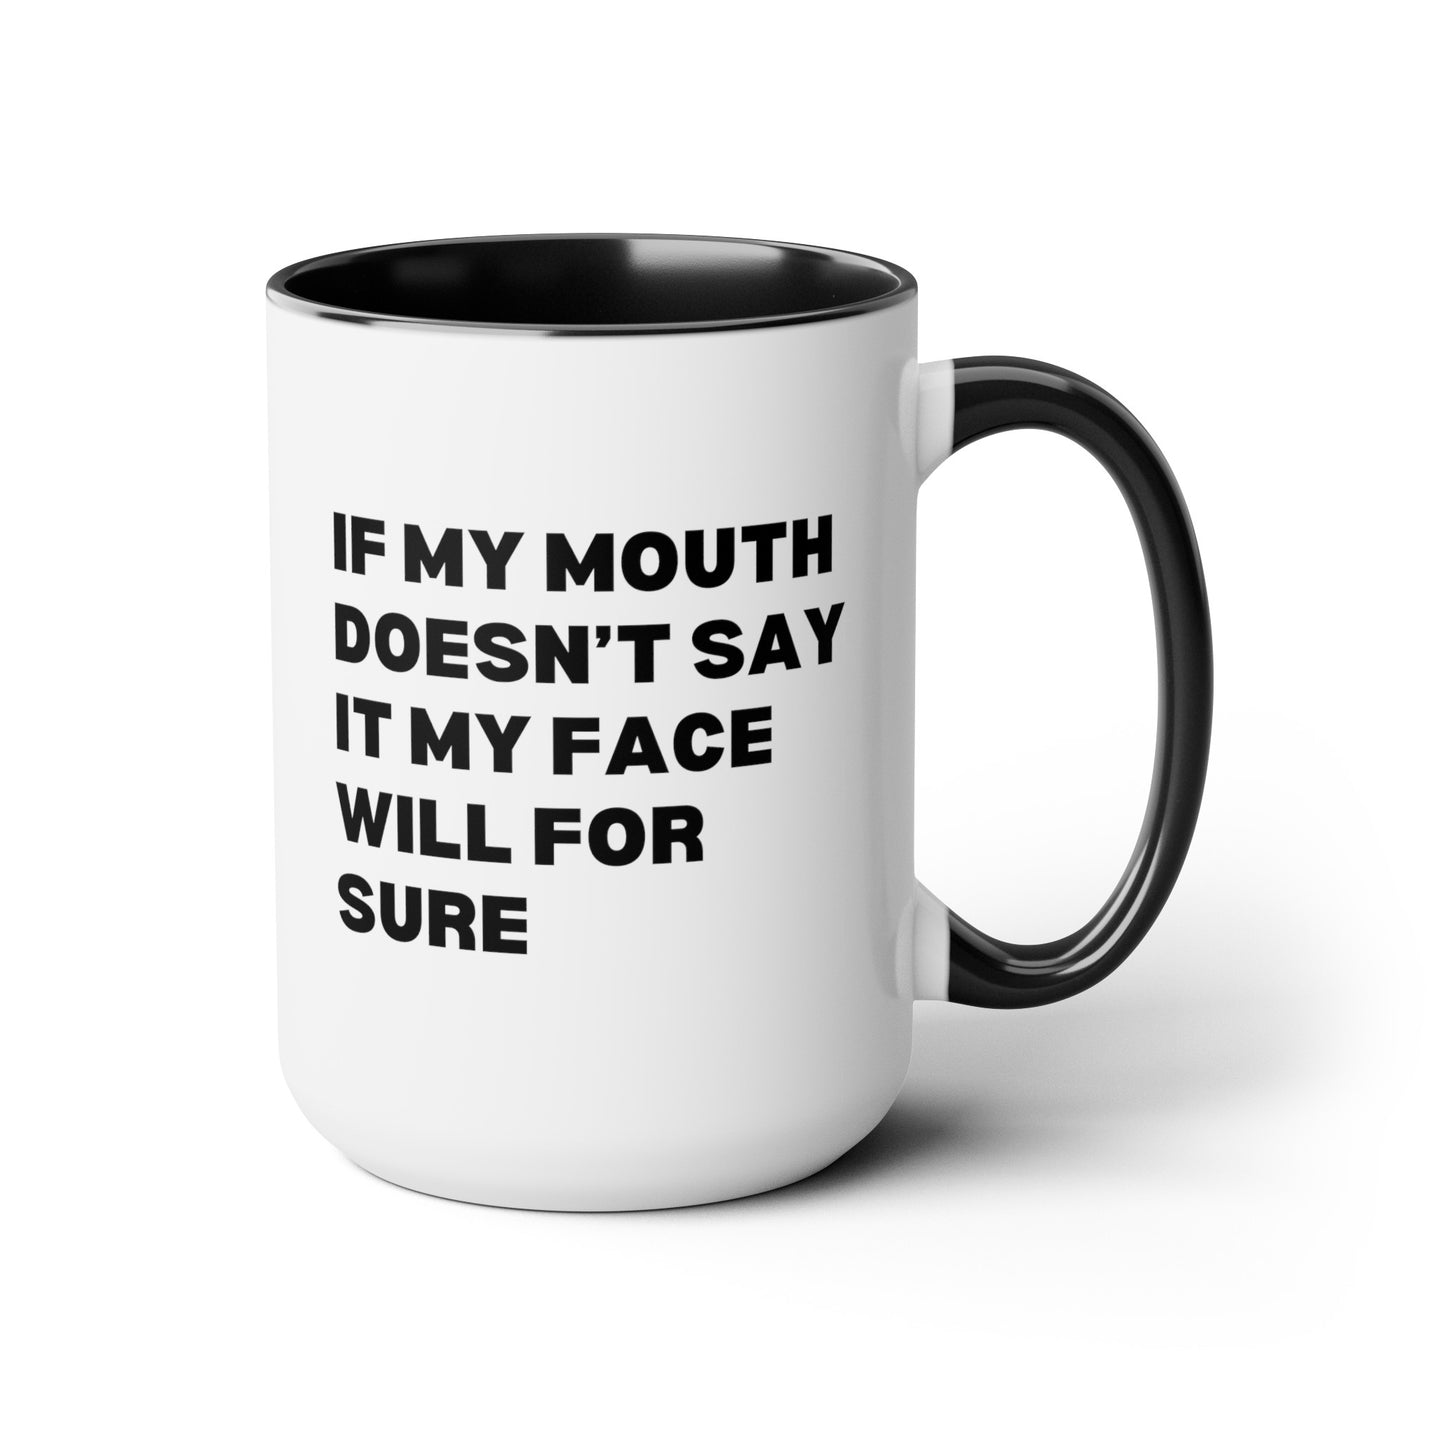 If My Mouth Doesn't Say It My Face Will For Sure 15oz white with with black accent large big funny coffee mug tea cup gift for her best friend office sarcastic sarcasm coworker waveywares wavey wares wavywares wavy wares